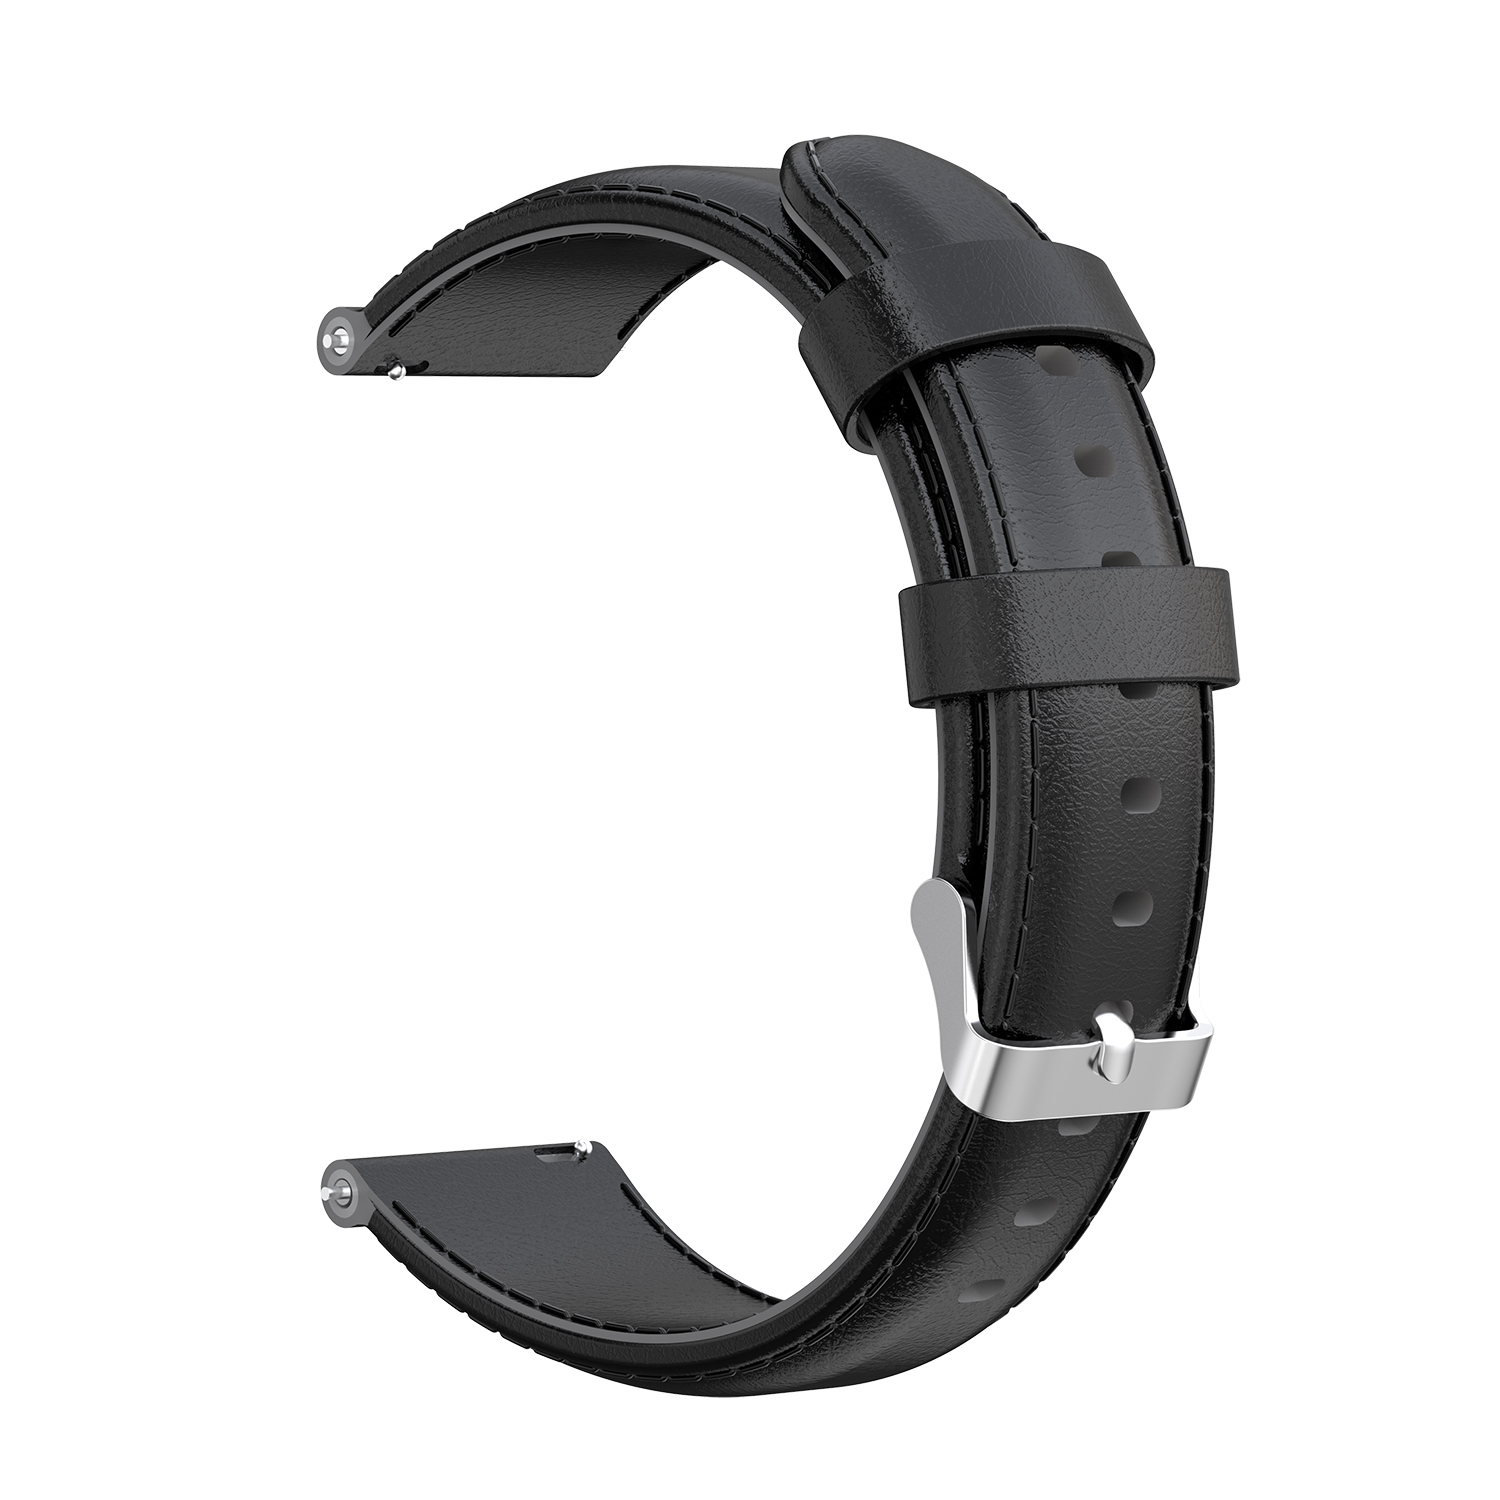 Bakeey-22mm-Genuine-Leather-Replacement-Strap-Smart-Watch-Band-For-Amazfit-GTR-47MM-1786519-14